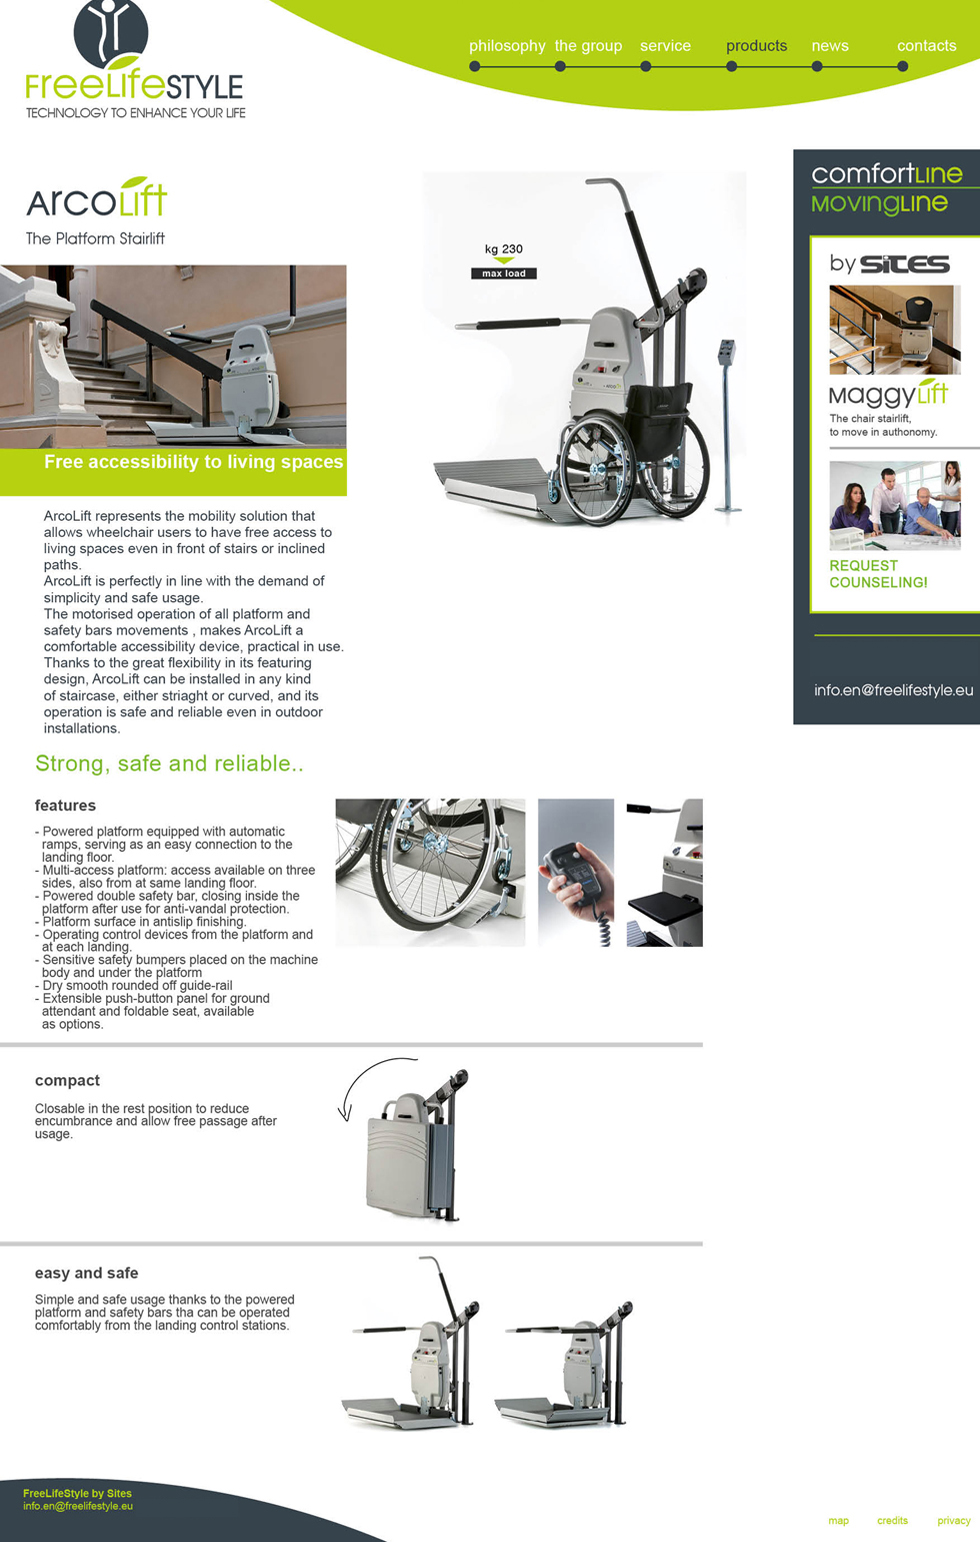 Arco Lift, the platform stairlift